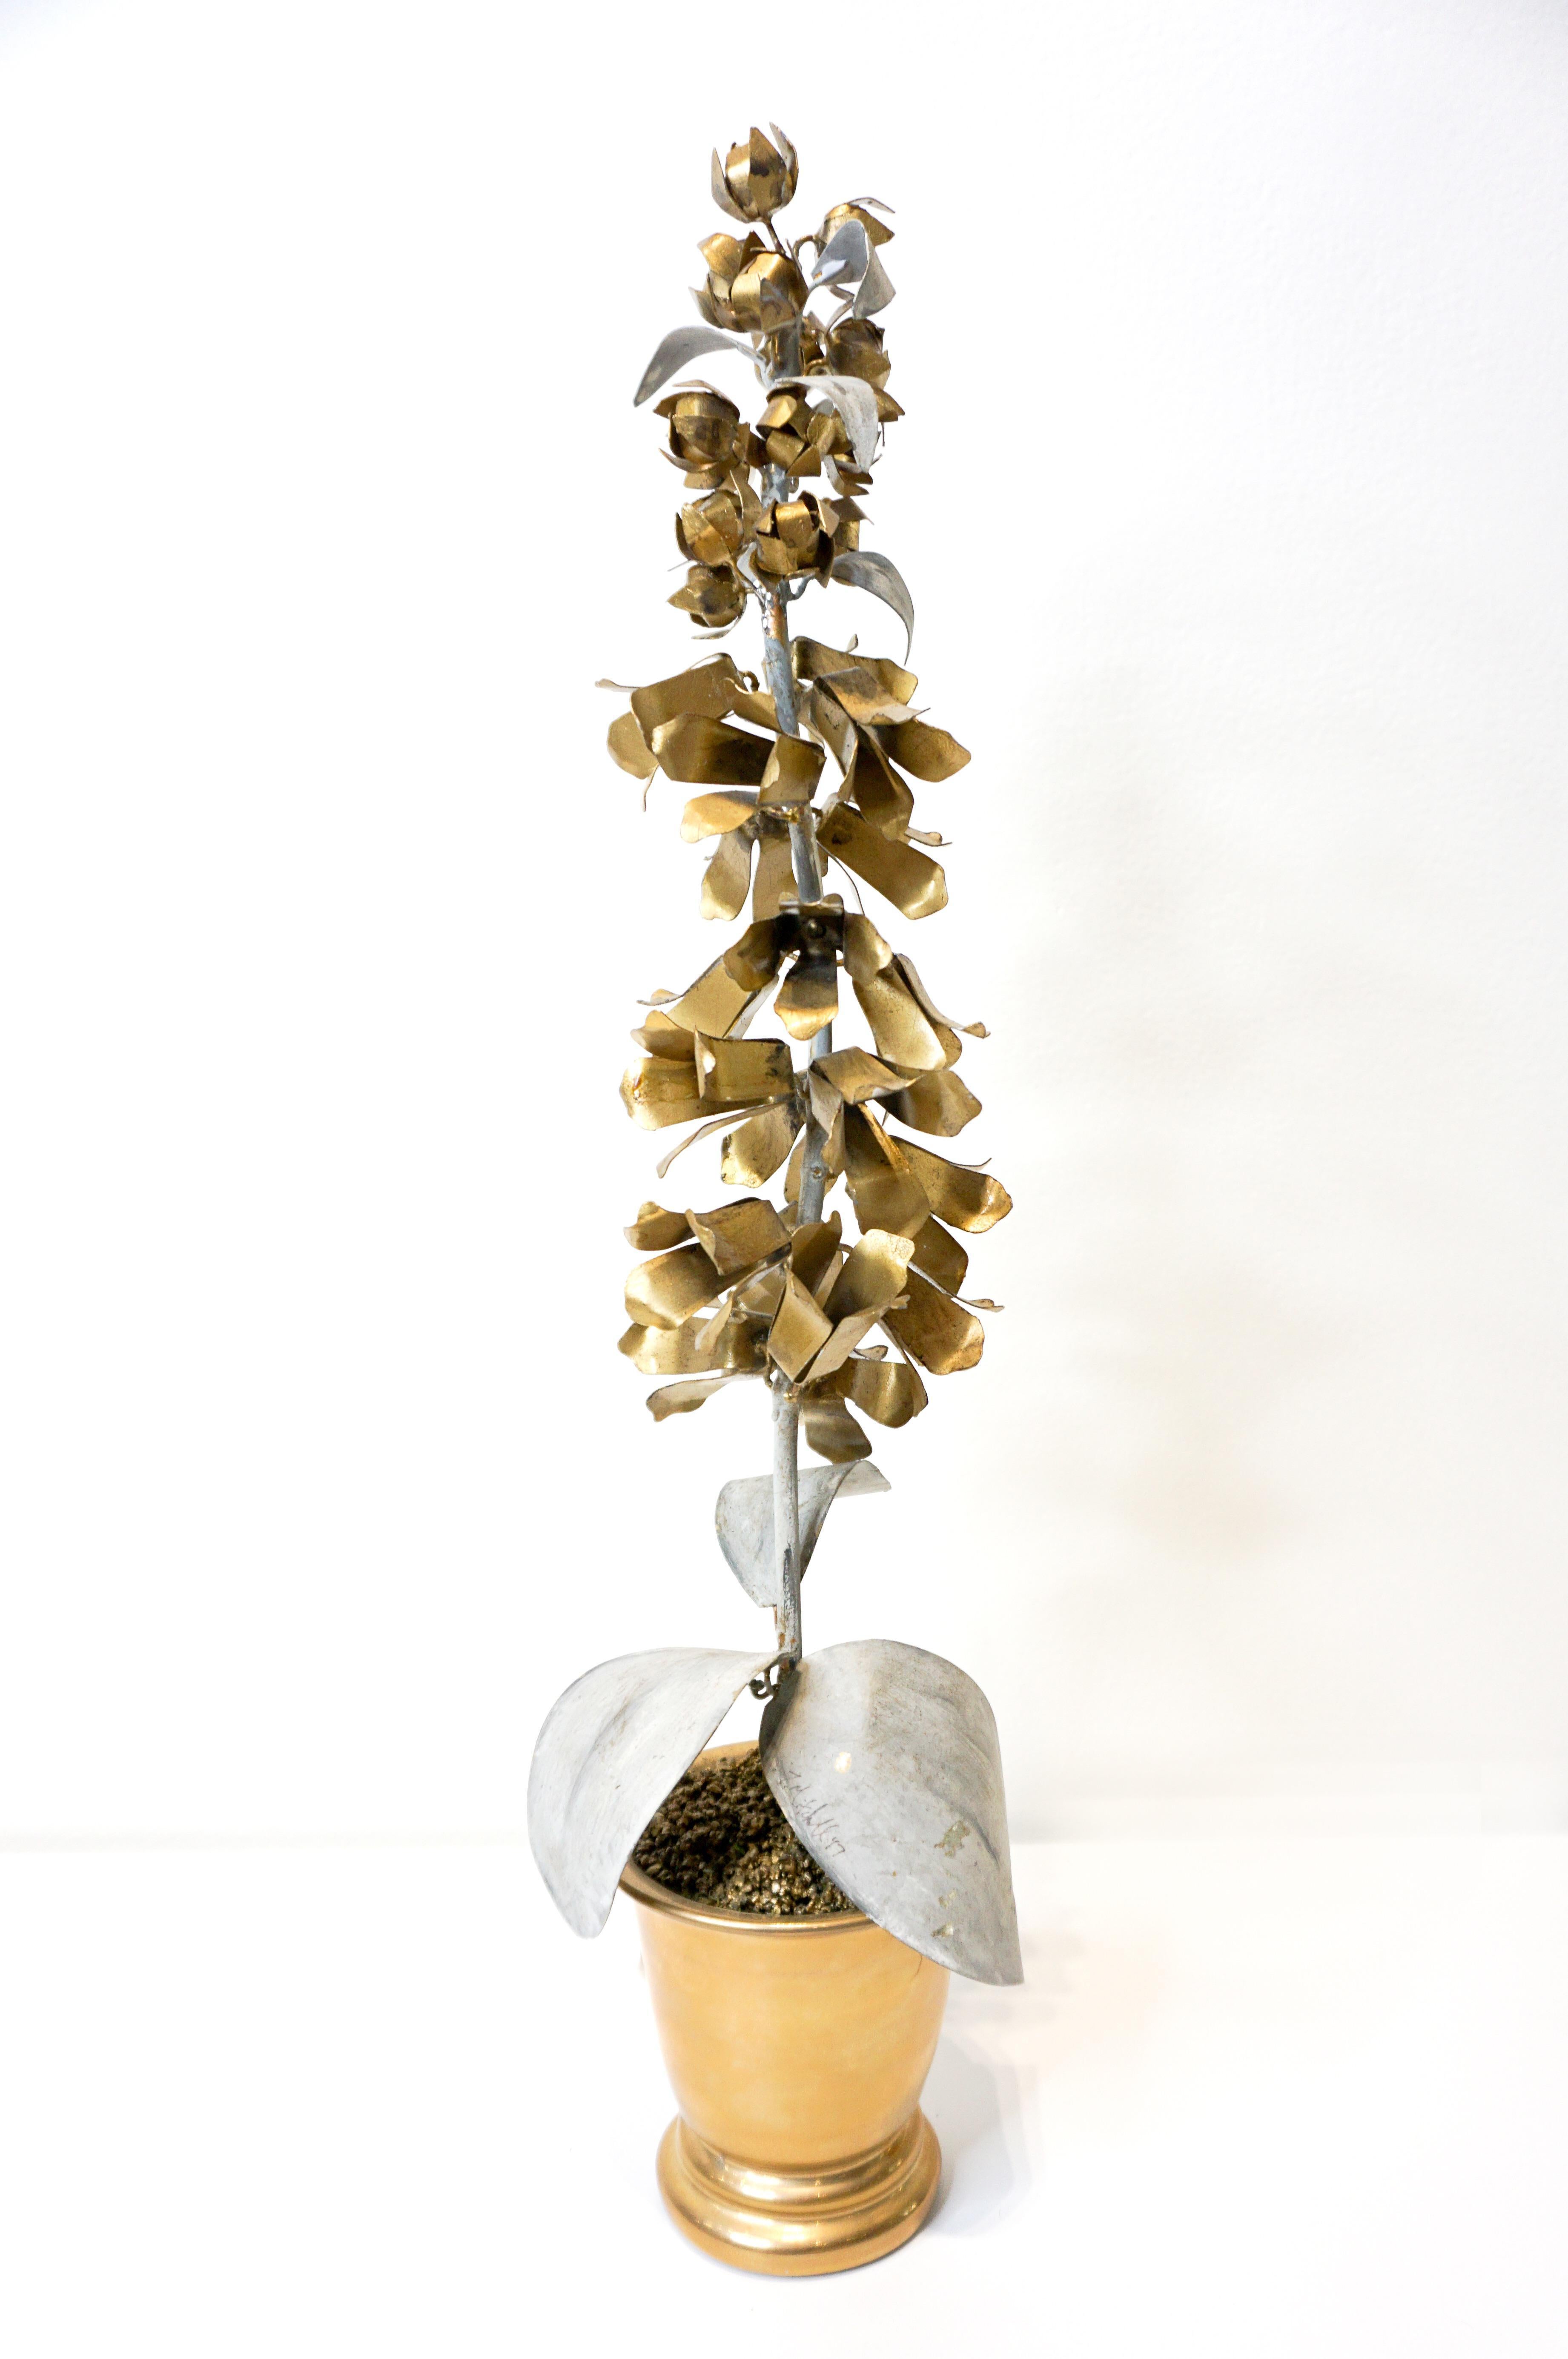 Hand painted Tommy Mitchell hollyhock tole flower in gold and zinc finish. Tommy Mitchell is a well-recognized artist in rendering florals in tole and hand painting them in his studios. This piece is sophisticated enough to be placed in the most